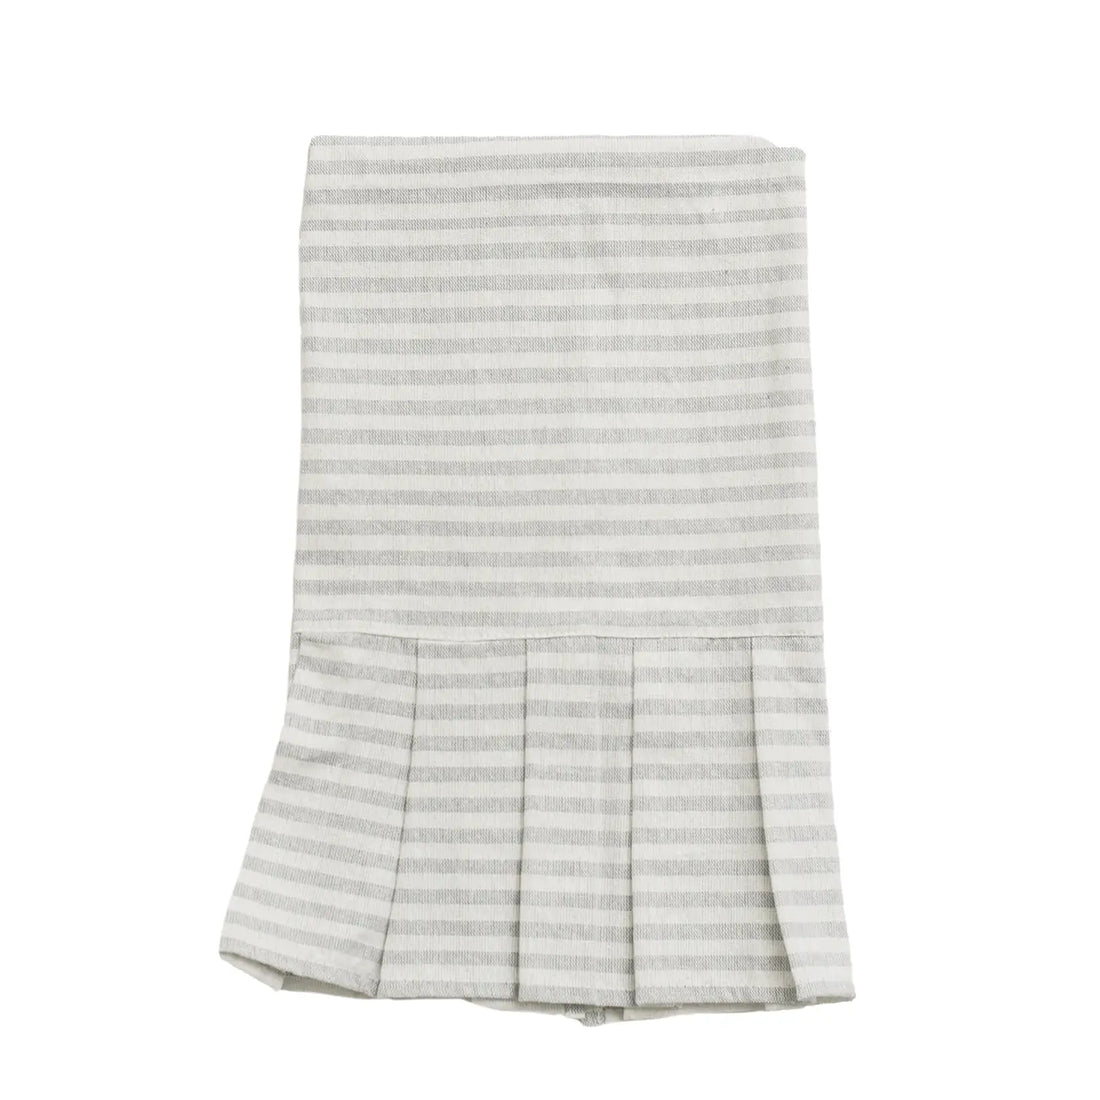 Striped Tea Towel with Ruffle - Cream with Grey Stripes